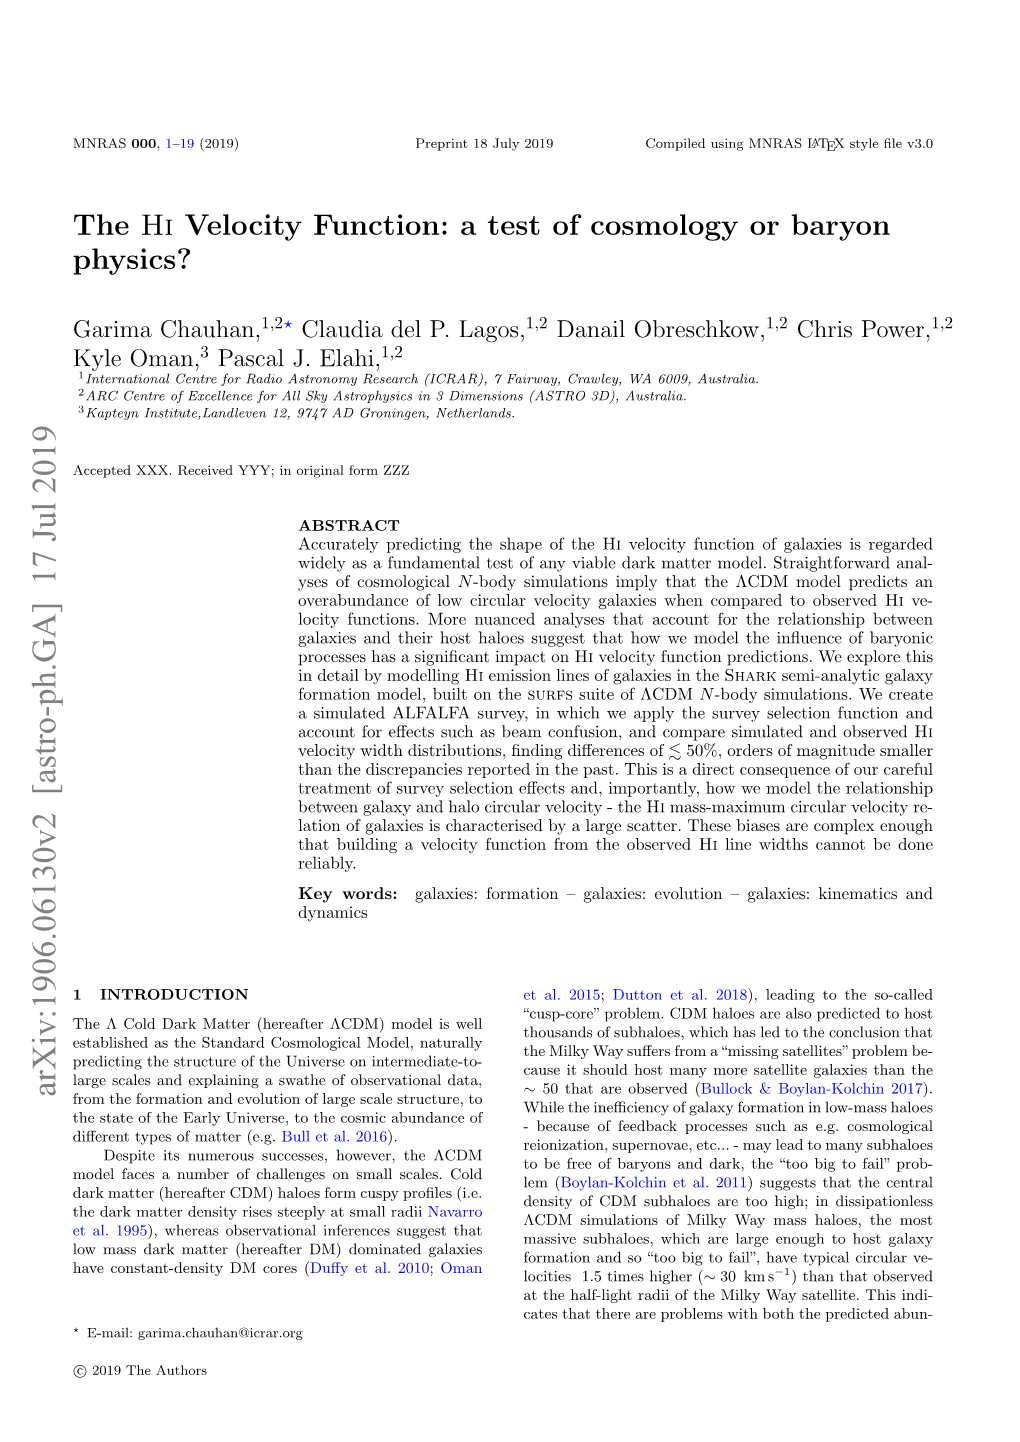 The Hi Velocity Function: a Test of Cosmology Or Baryon Physics?